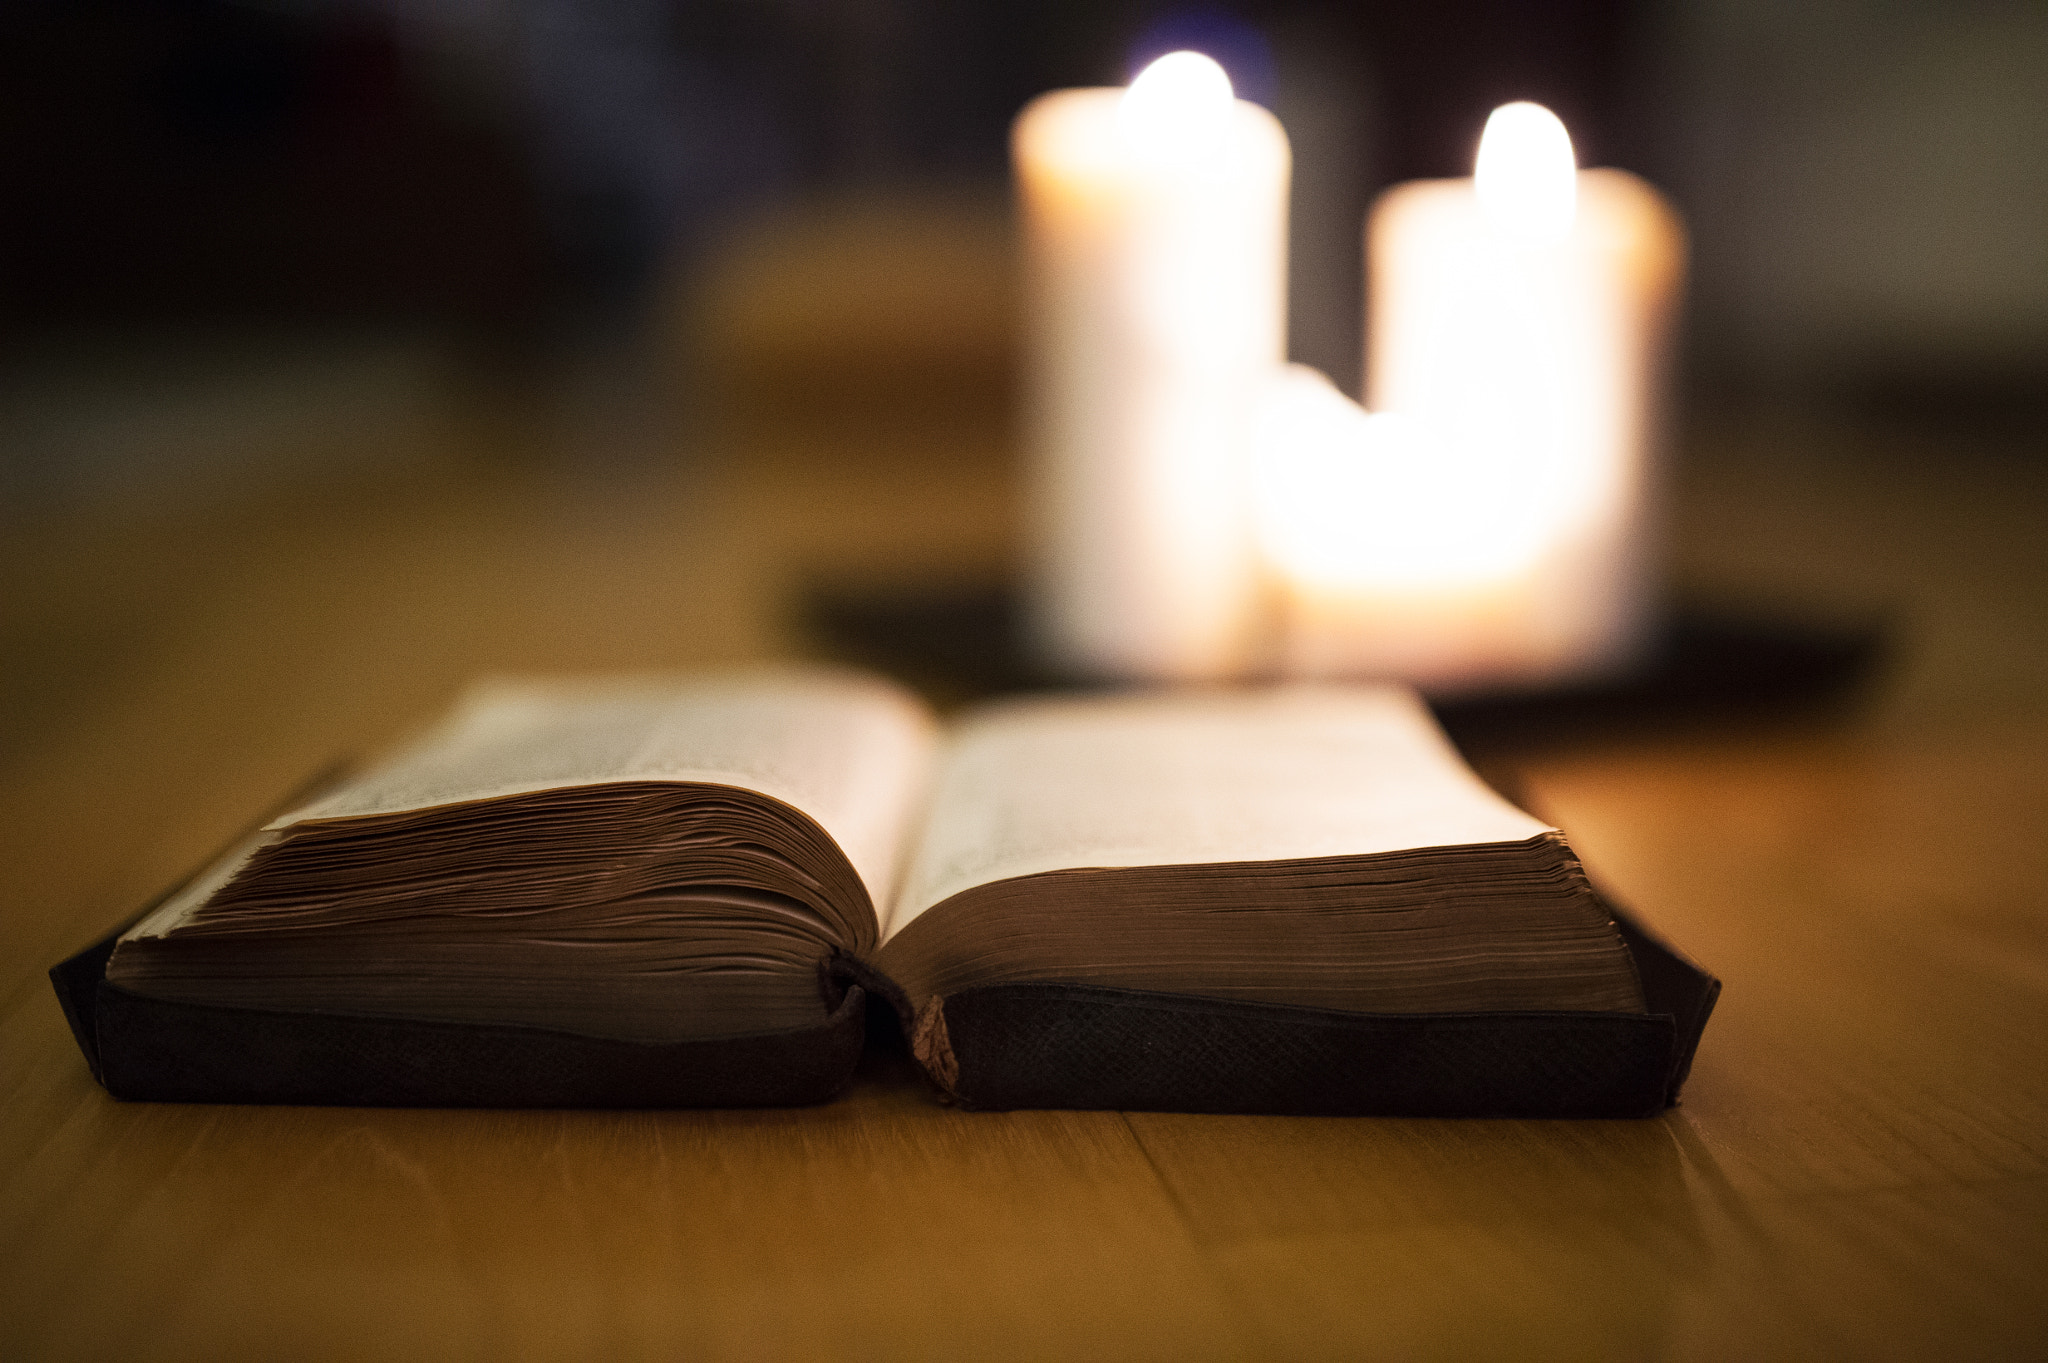 Nikon D4S sample photo. Bible laid on wooden floor, burning candles in the background photography